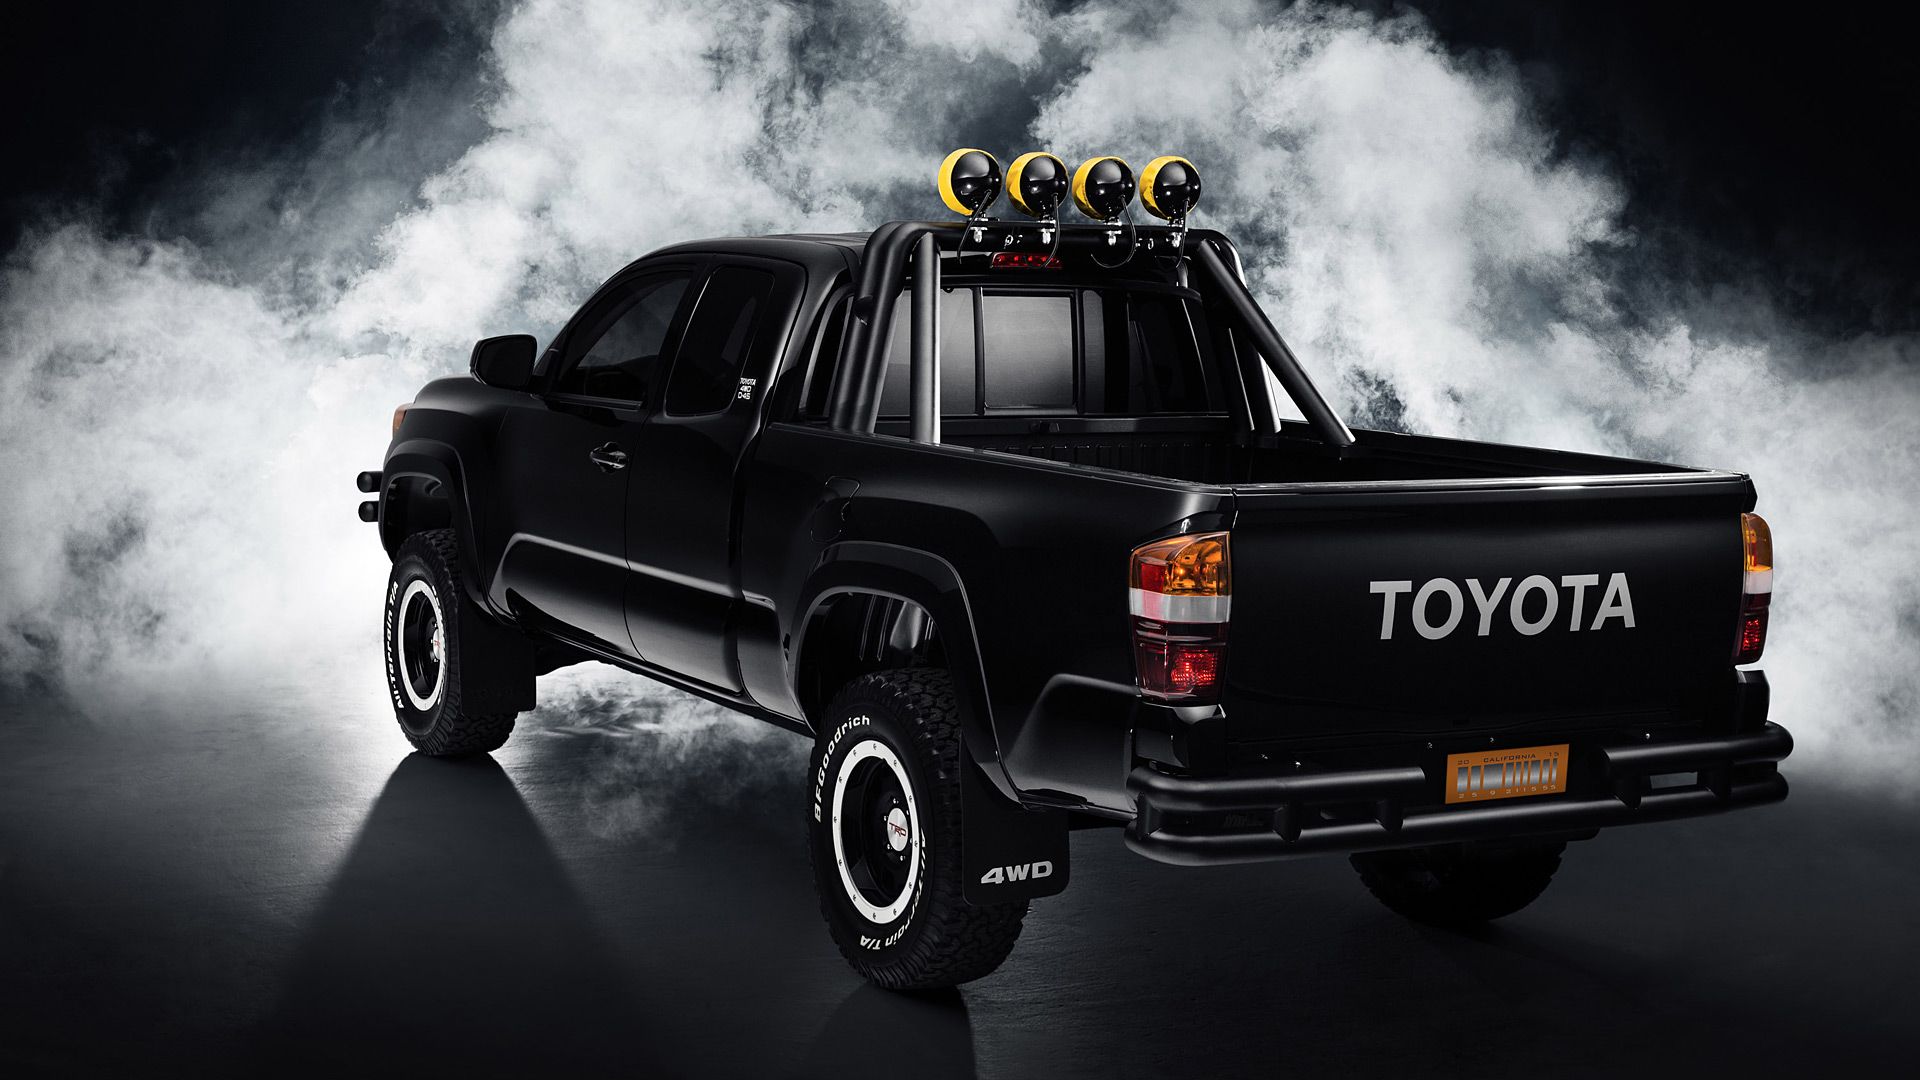 Toyota Tacoma 'Back to the Future' Concept Wallpaper, Specs & Videos